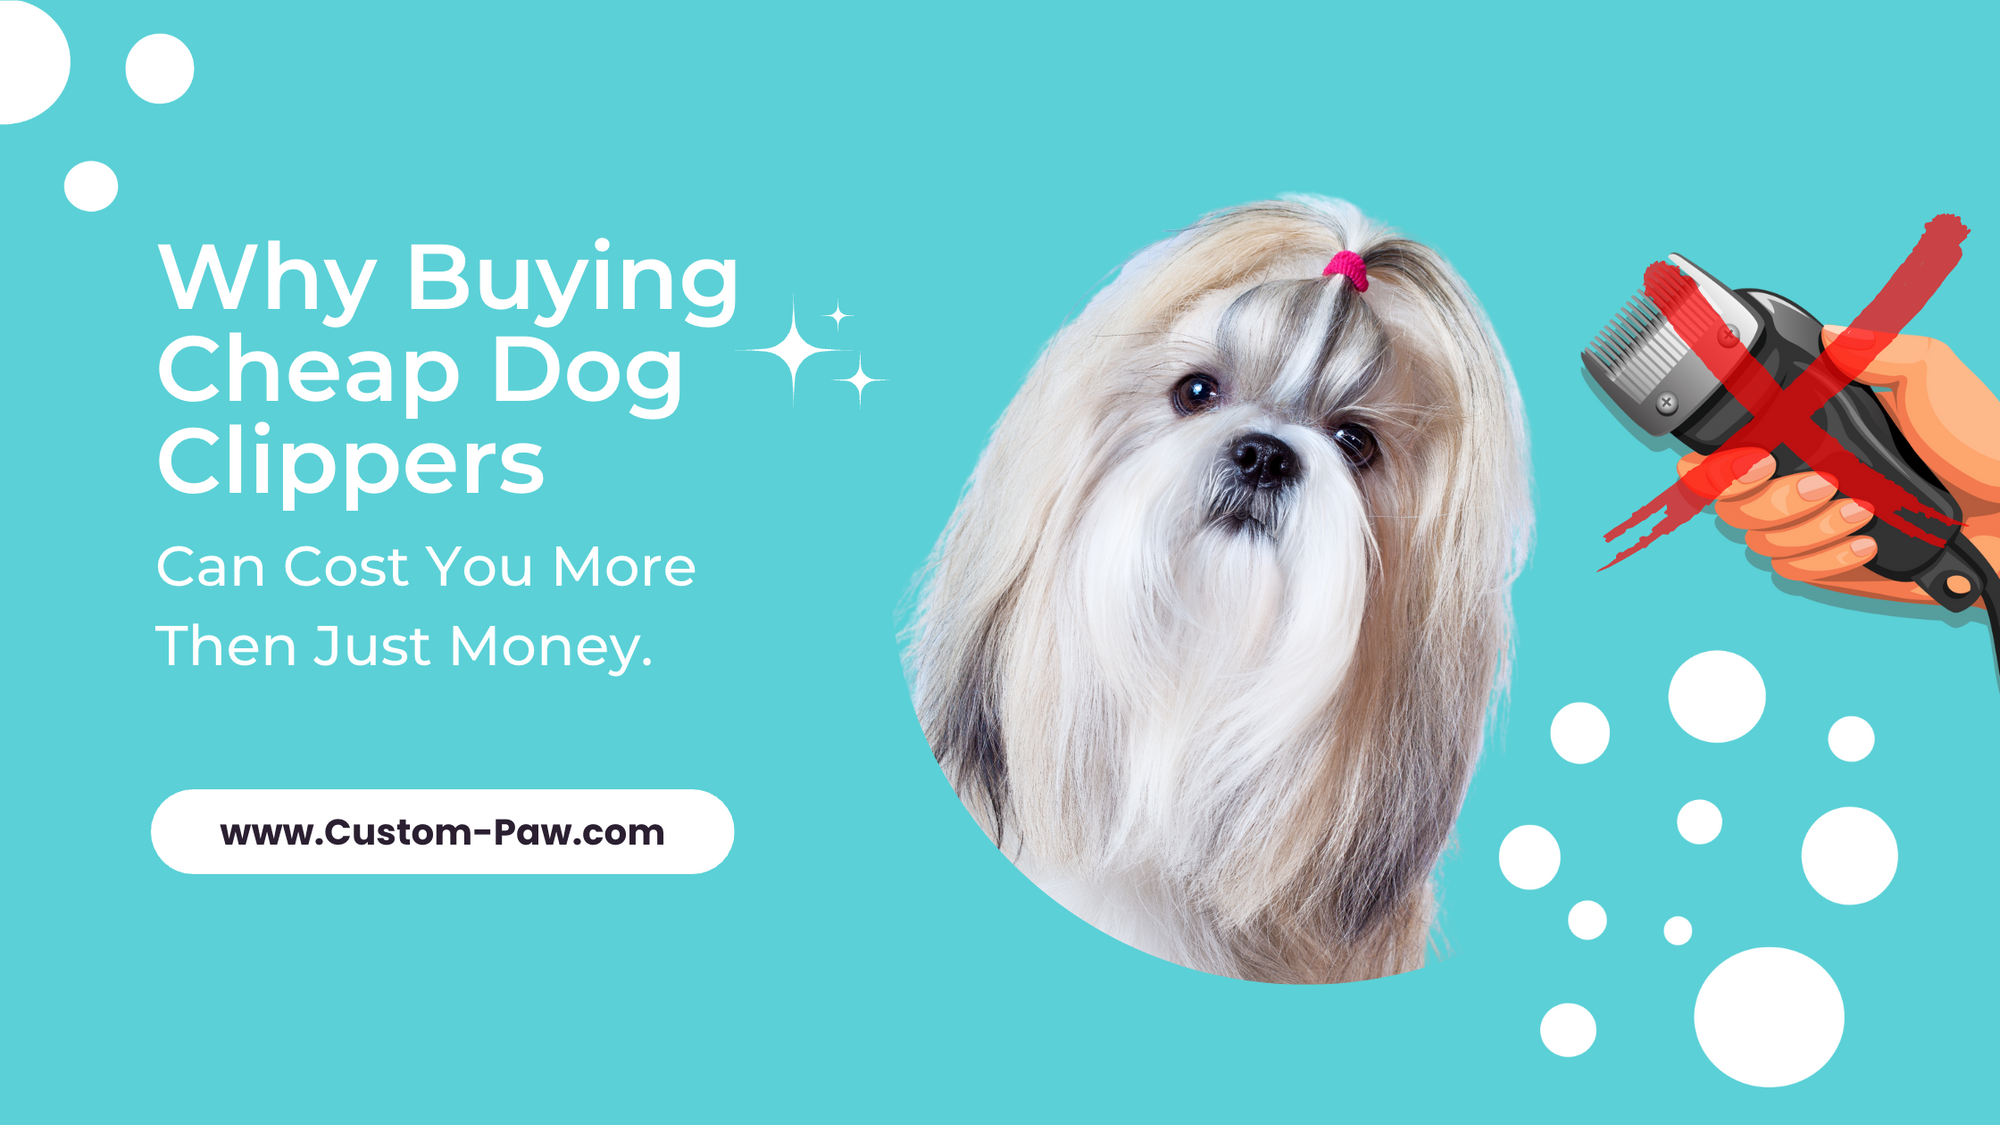 Why Buying Cheap Dog Clippers Can Cost You More Than Just Money.